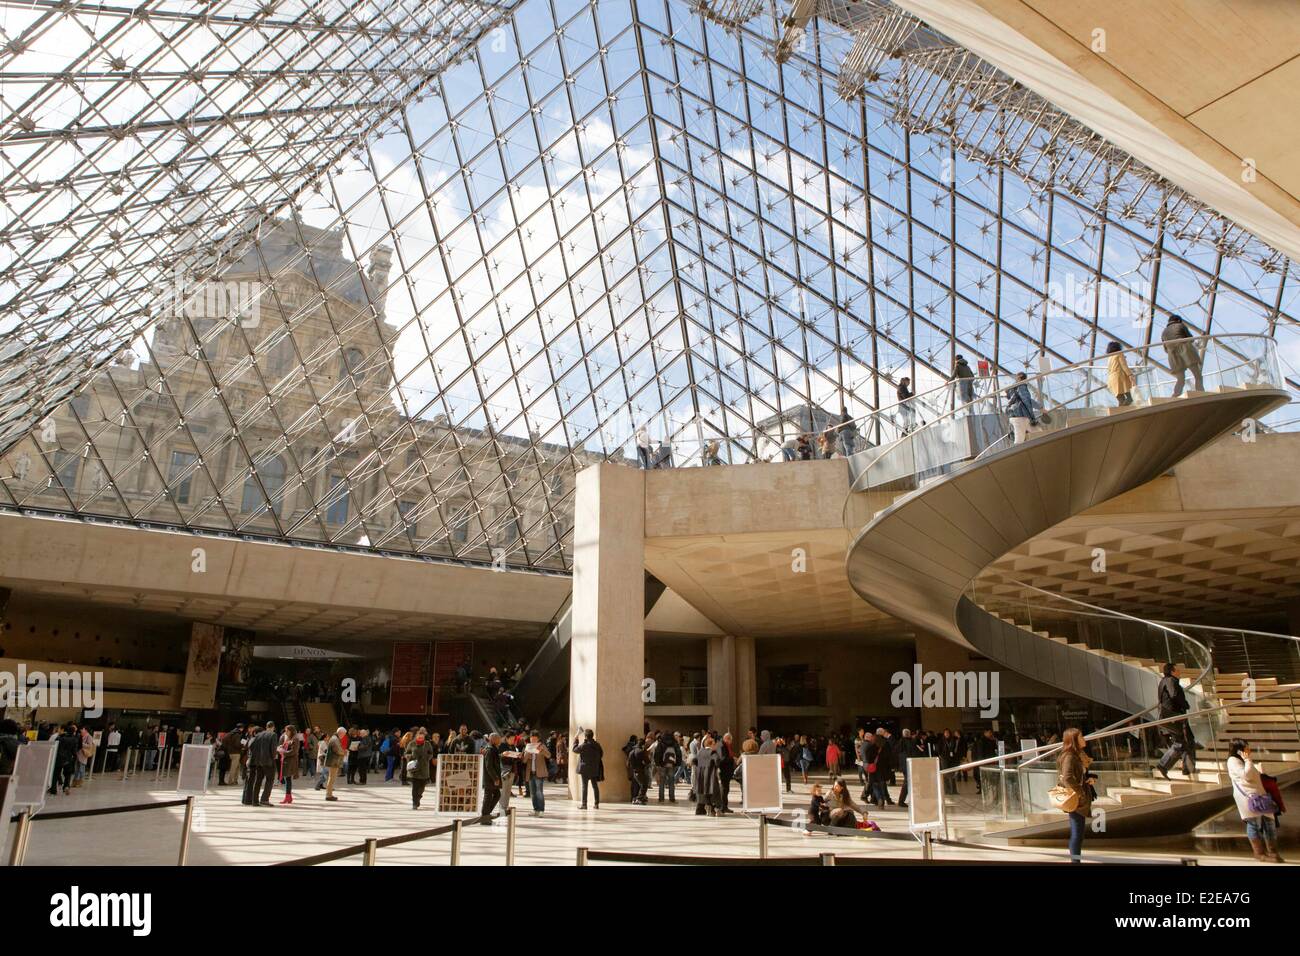 France, Paris, Musee du Louvre entrance (Louvre museum), glass pyramid by architect Ieoh Ming Pei and Denon Pavillion Stock Photo